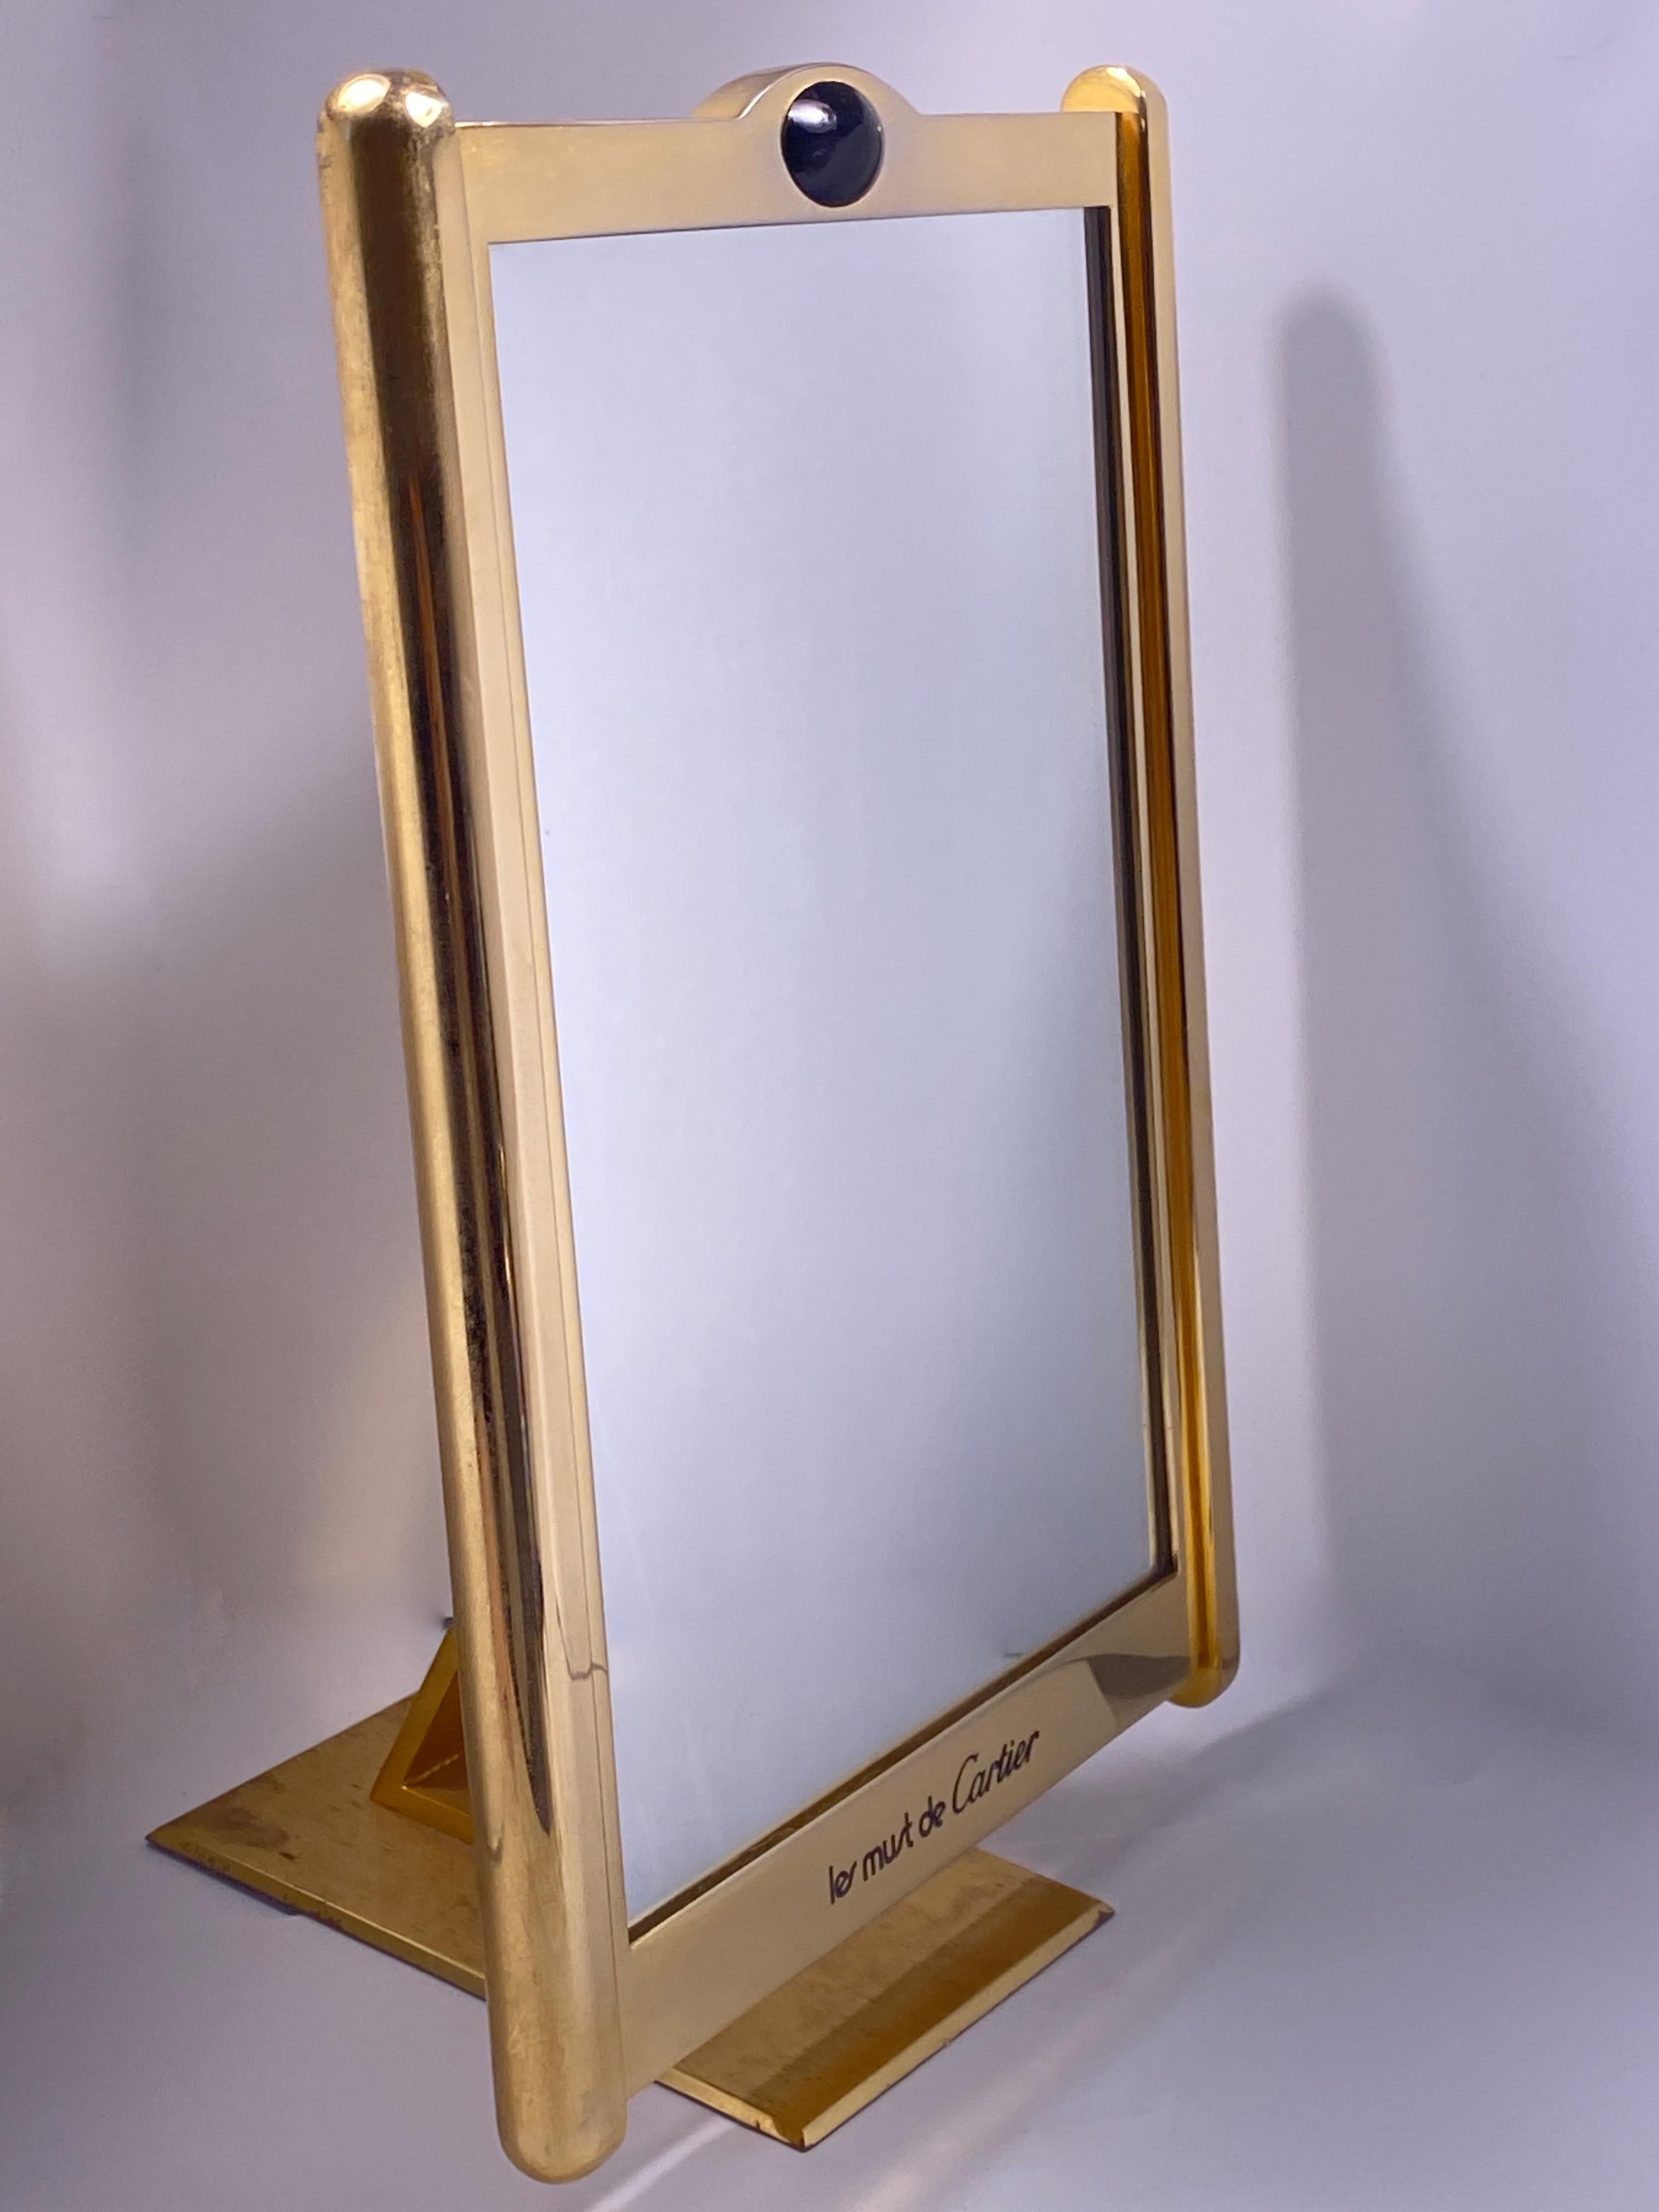 Vintage Cartier Classic Tank Pivotal Axis Table Mirror Gold-Plated, 1970 For Sale 3